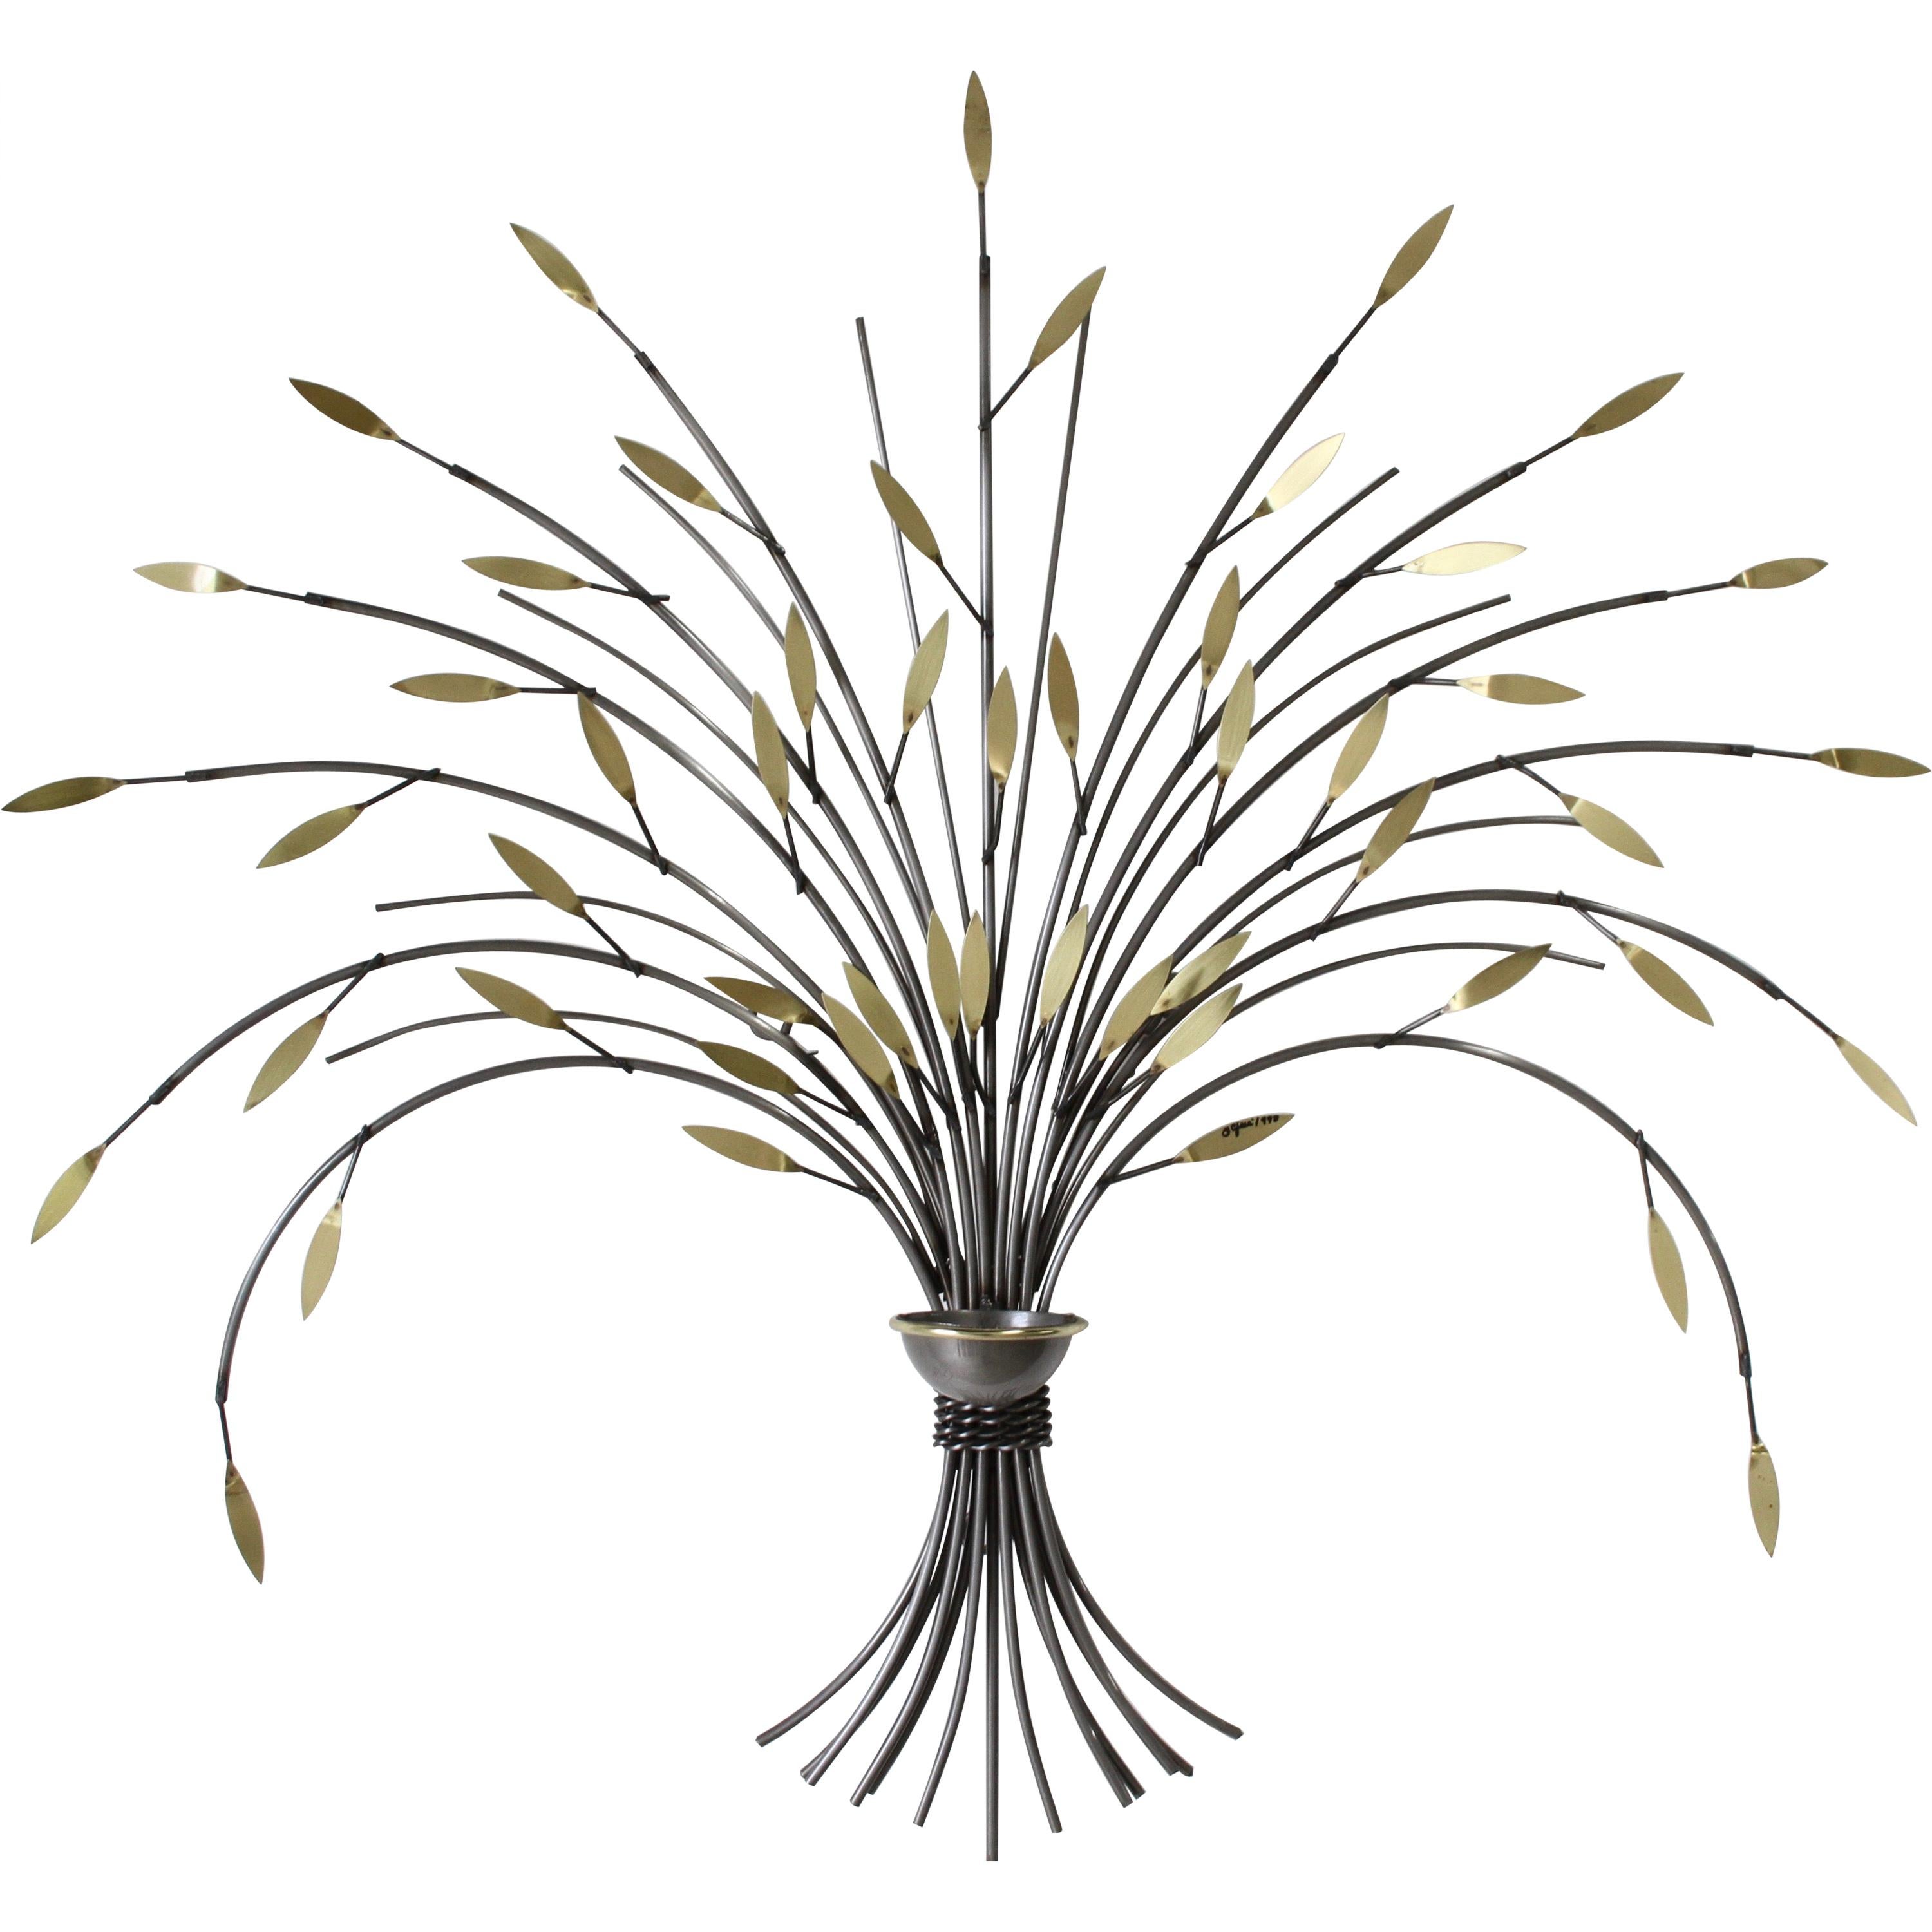 Curtis Jeré, Tree Sculpture Candleholder or Sconce Made of Brass and Steel For Sale